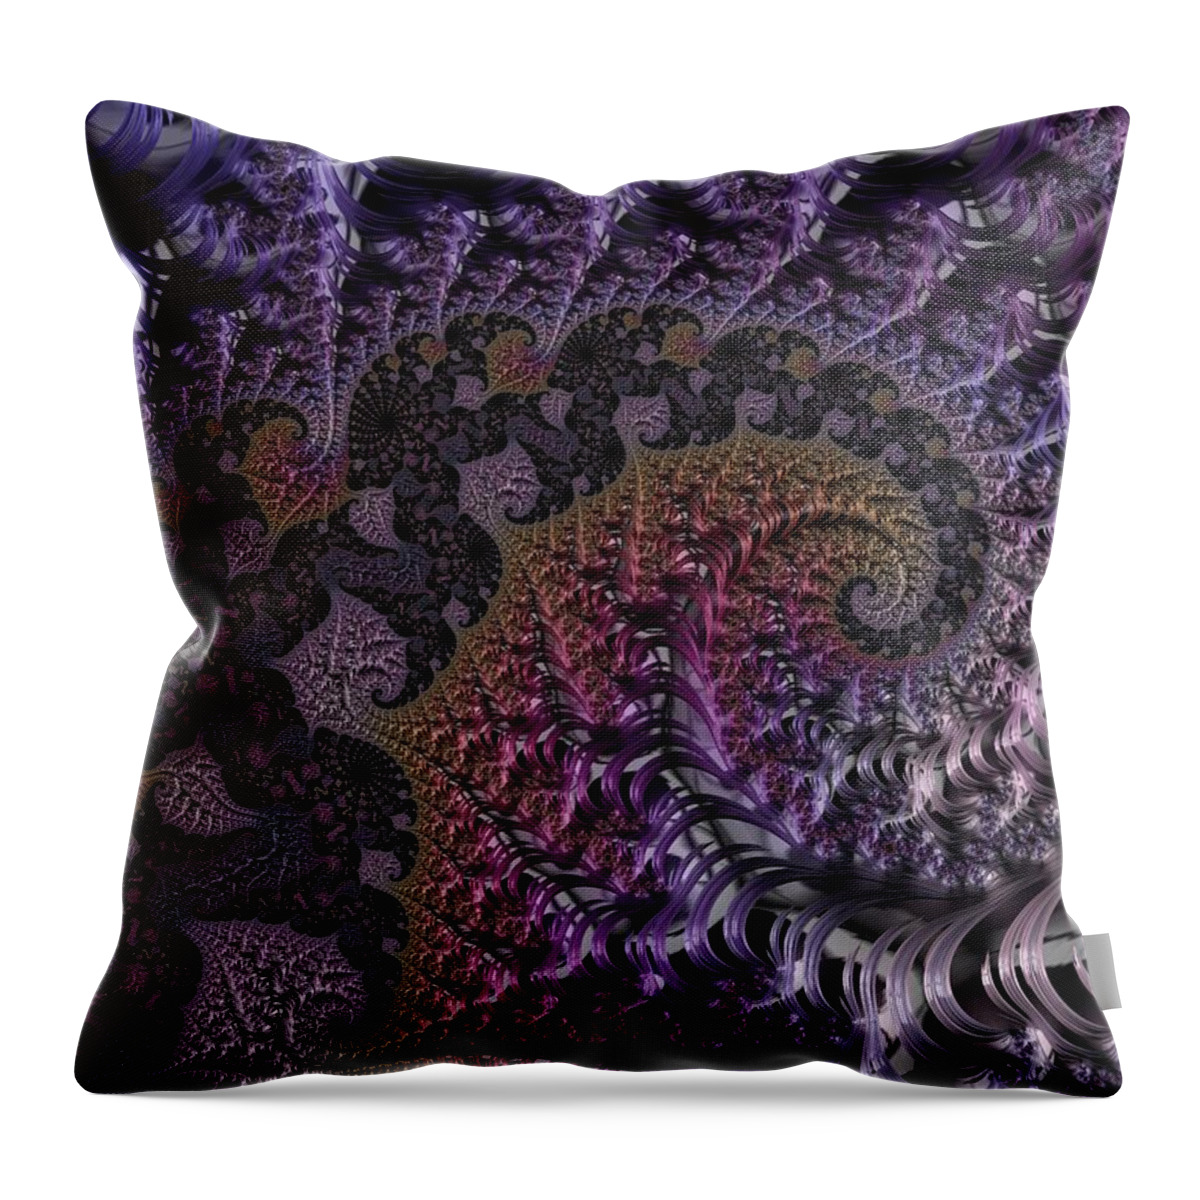 Fractal Throw Pillow featuring the digital art Ultra Leaf Spiral by Paisley O'Farrell